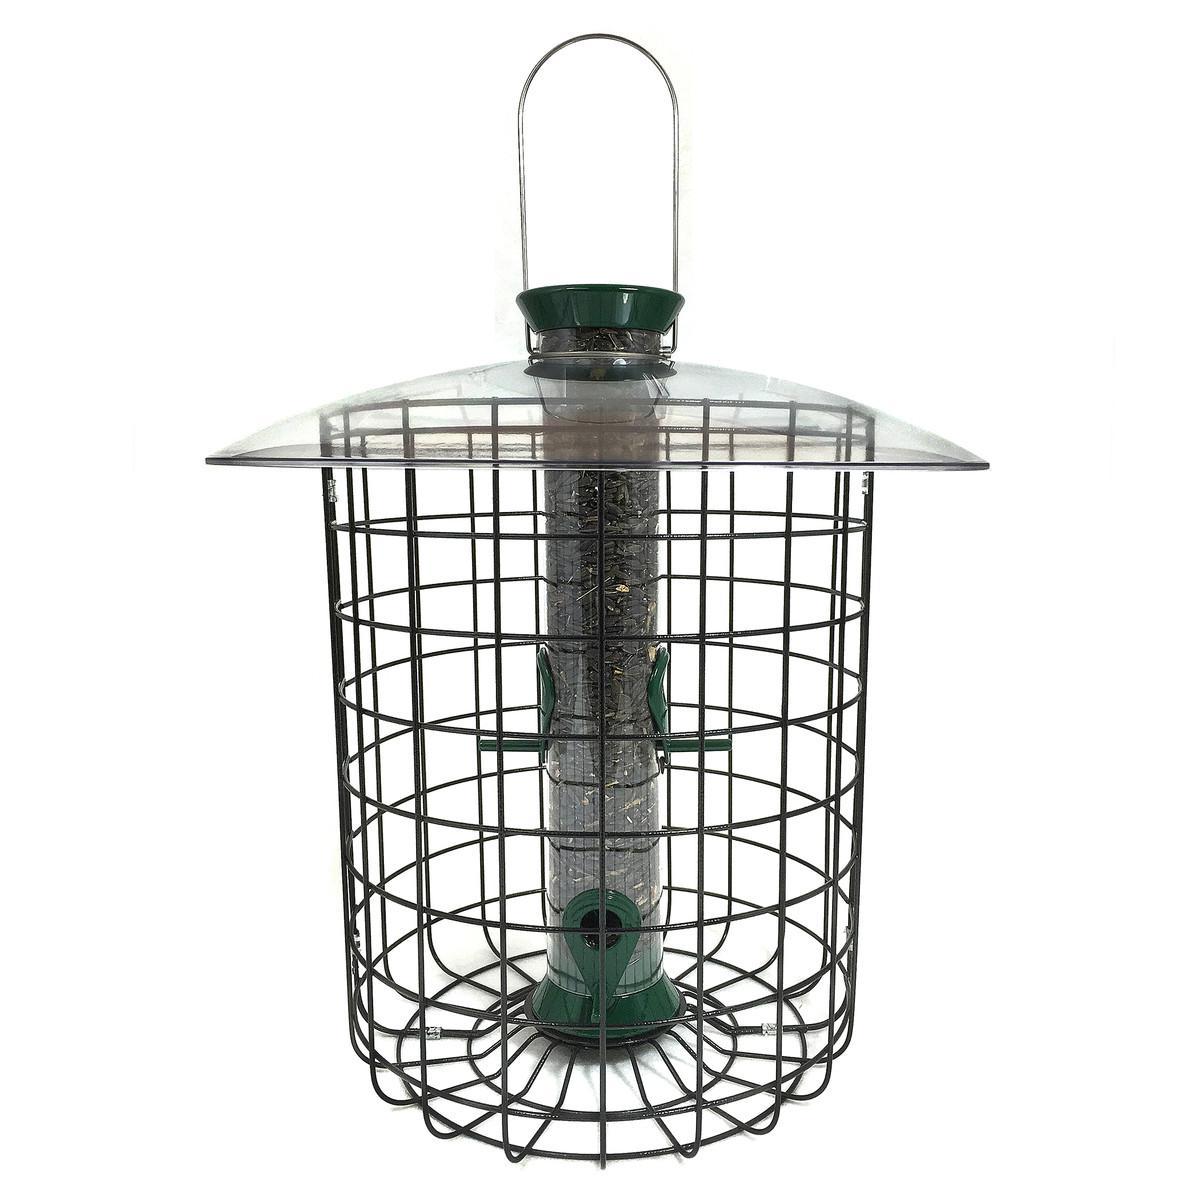 Droll 15" Domed Cage 1#